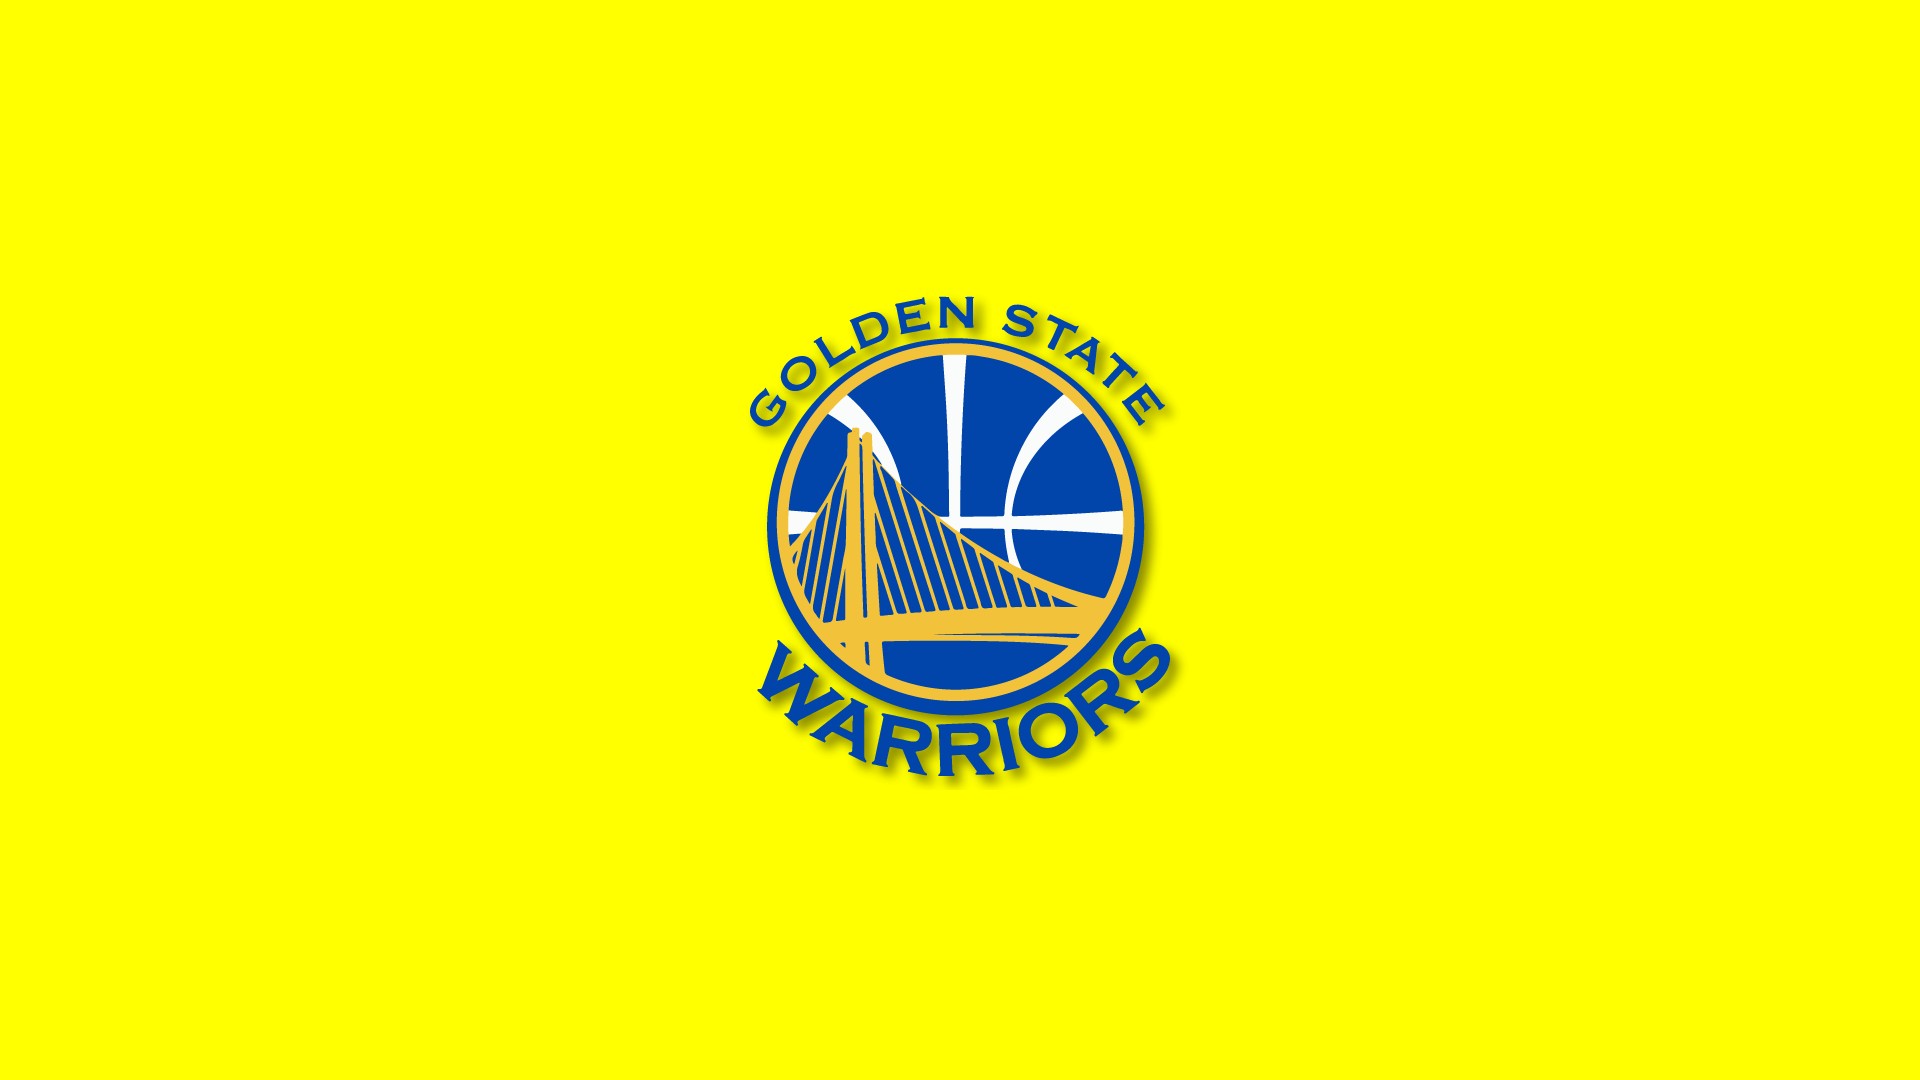 Golden State Warriors Desktop Backgrounds HD with image resolution 1920x1080 pixel. You can use this wallpaper as background for your desktop Computer Screensavers, Android or iPhone smartphones